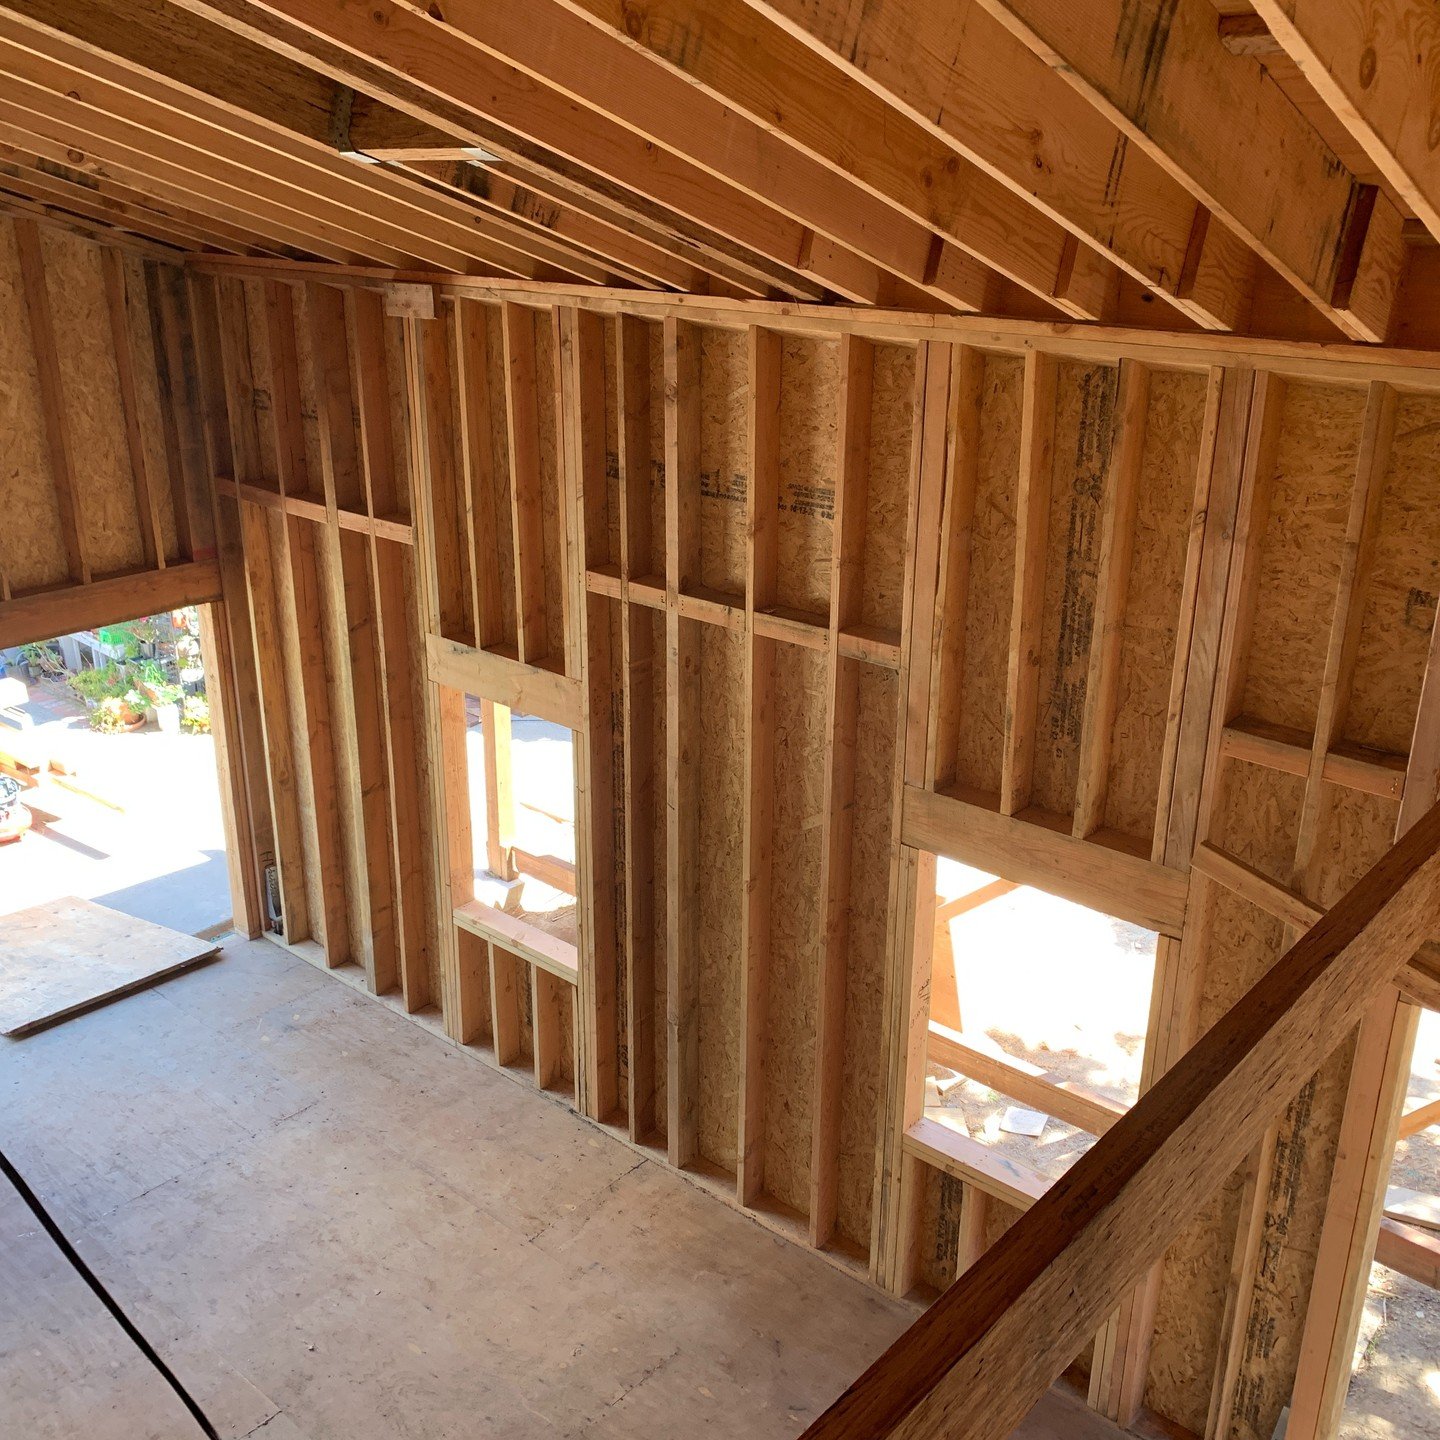 We're excited to share this quick look at one of our projects in the South Bay. This detached two-story Accessory Dwelling Unit (ADU) is currently under construction and progressing wonderfully.

Our team worked on the architectural design and struct